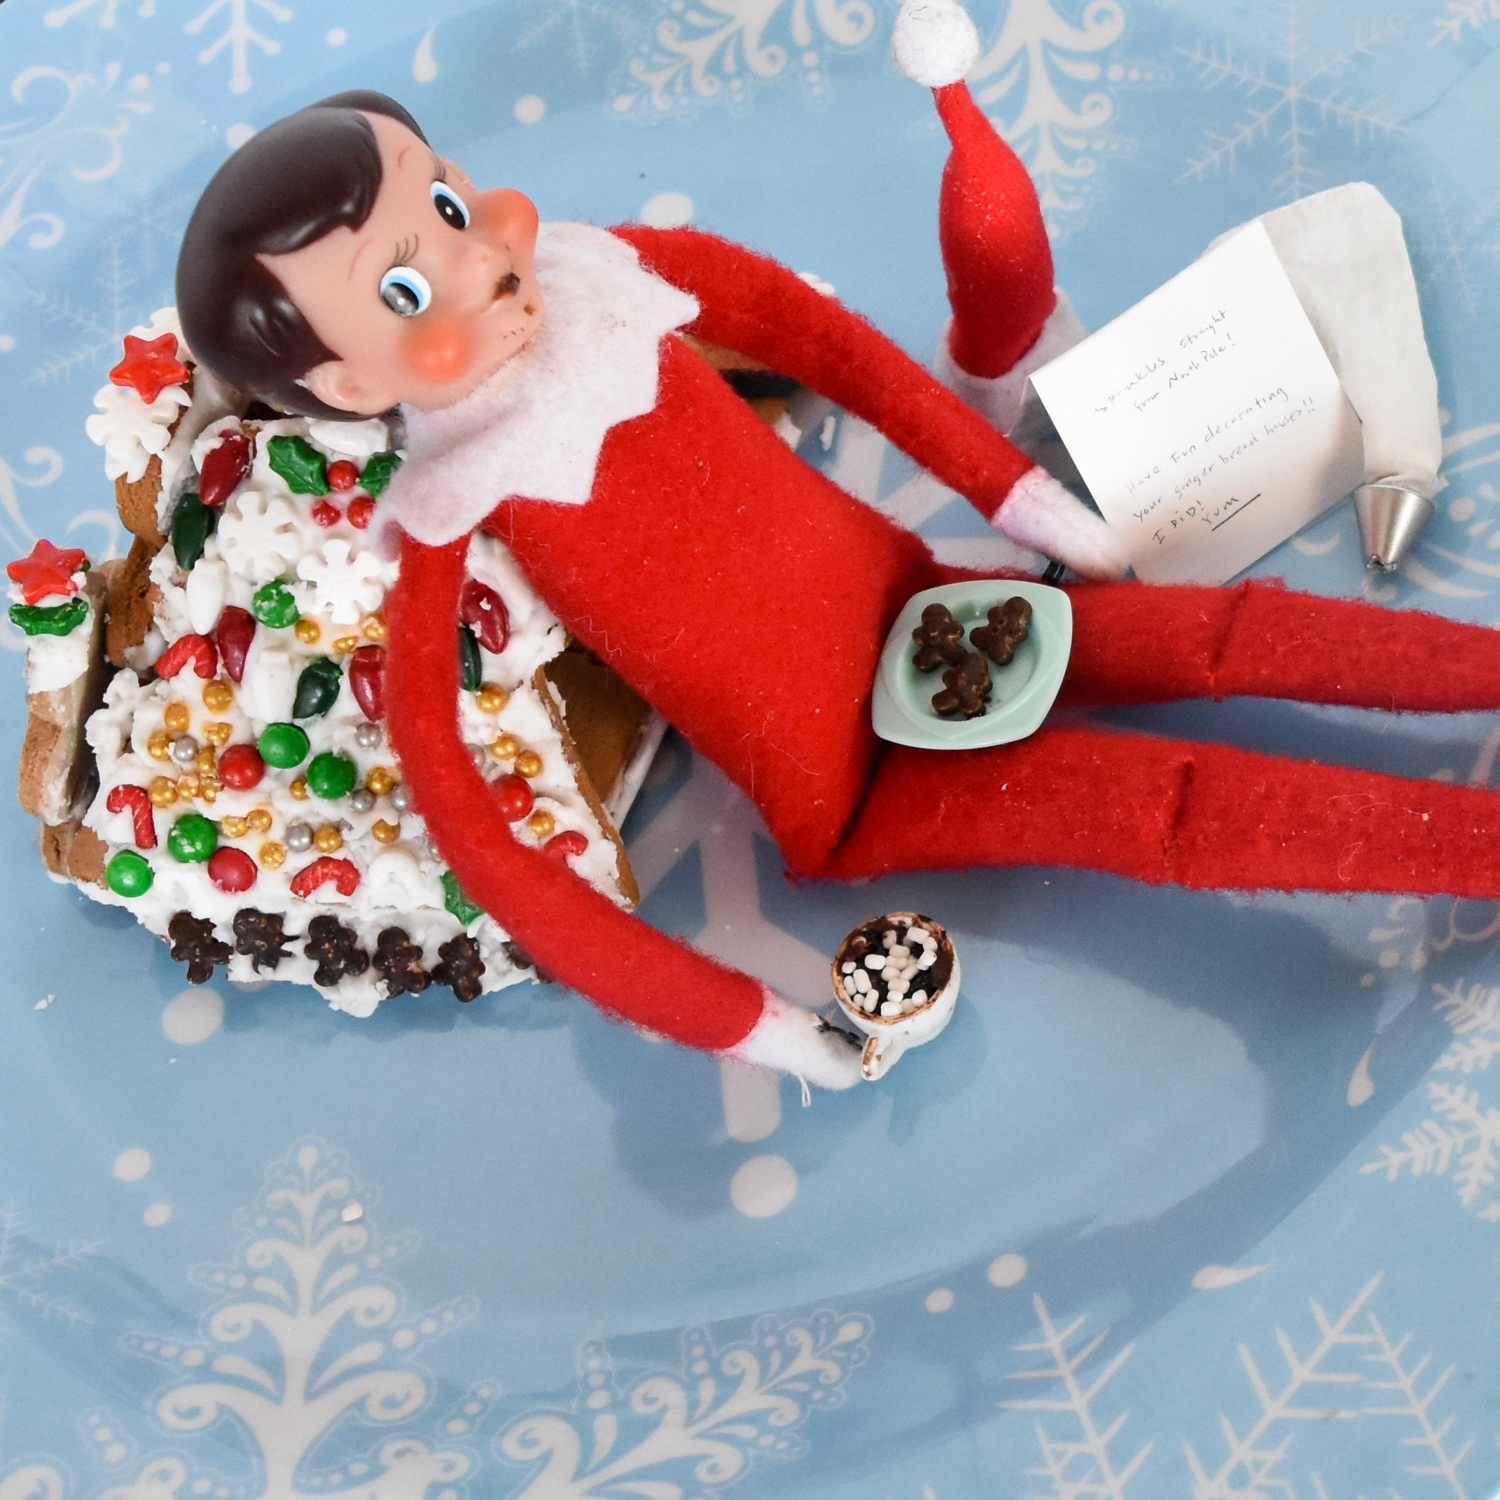 Elf on the Shelf: Decorating Gingerbread Houses